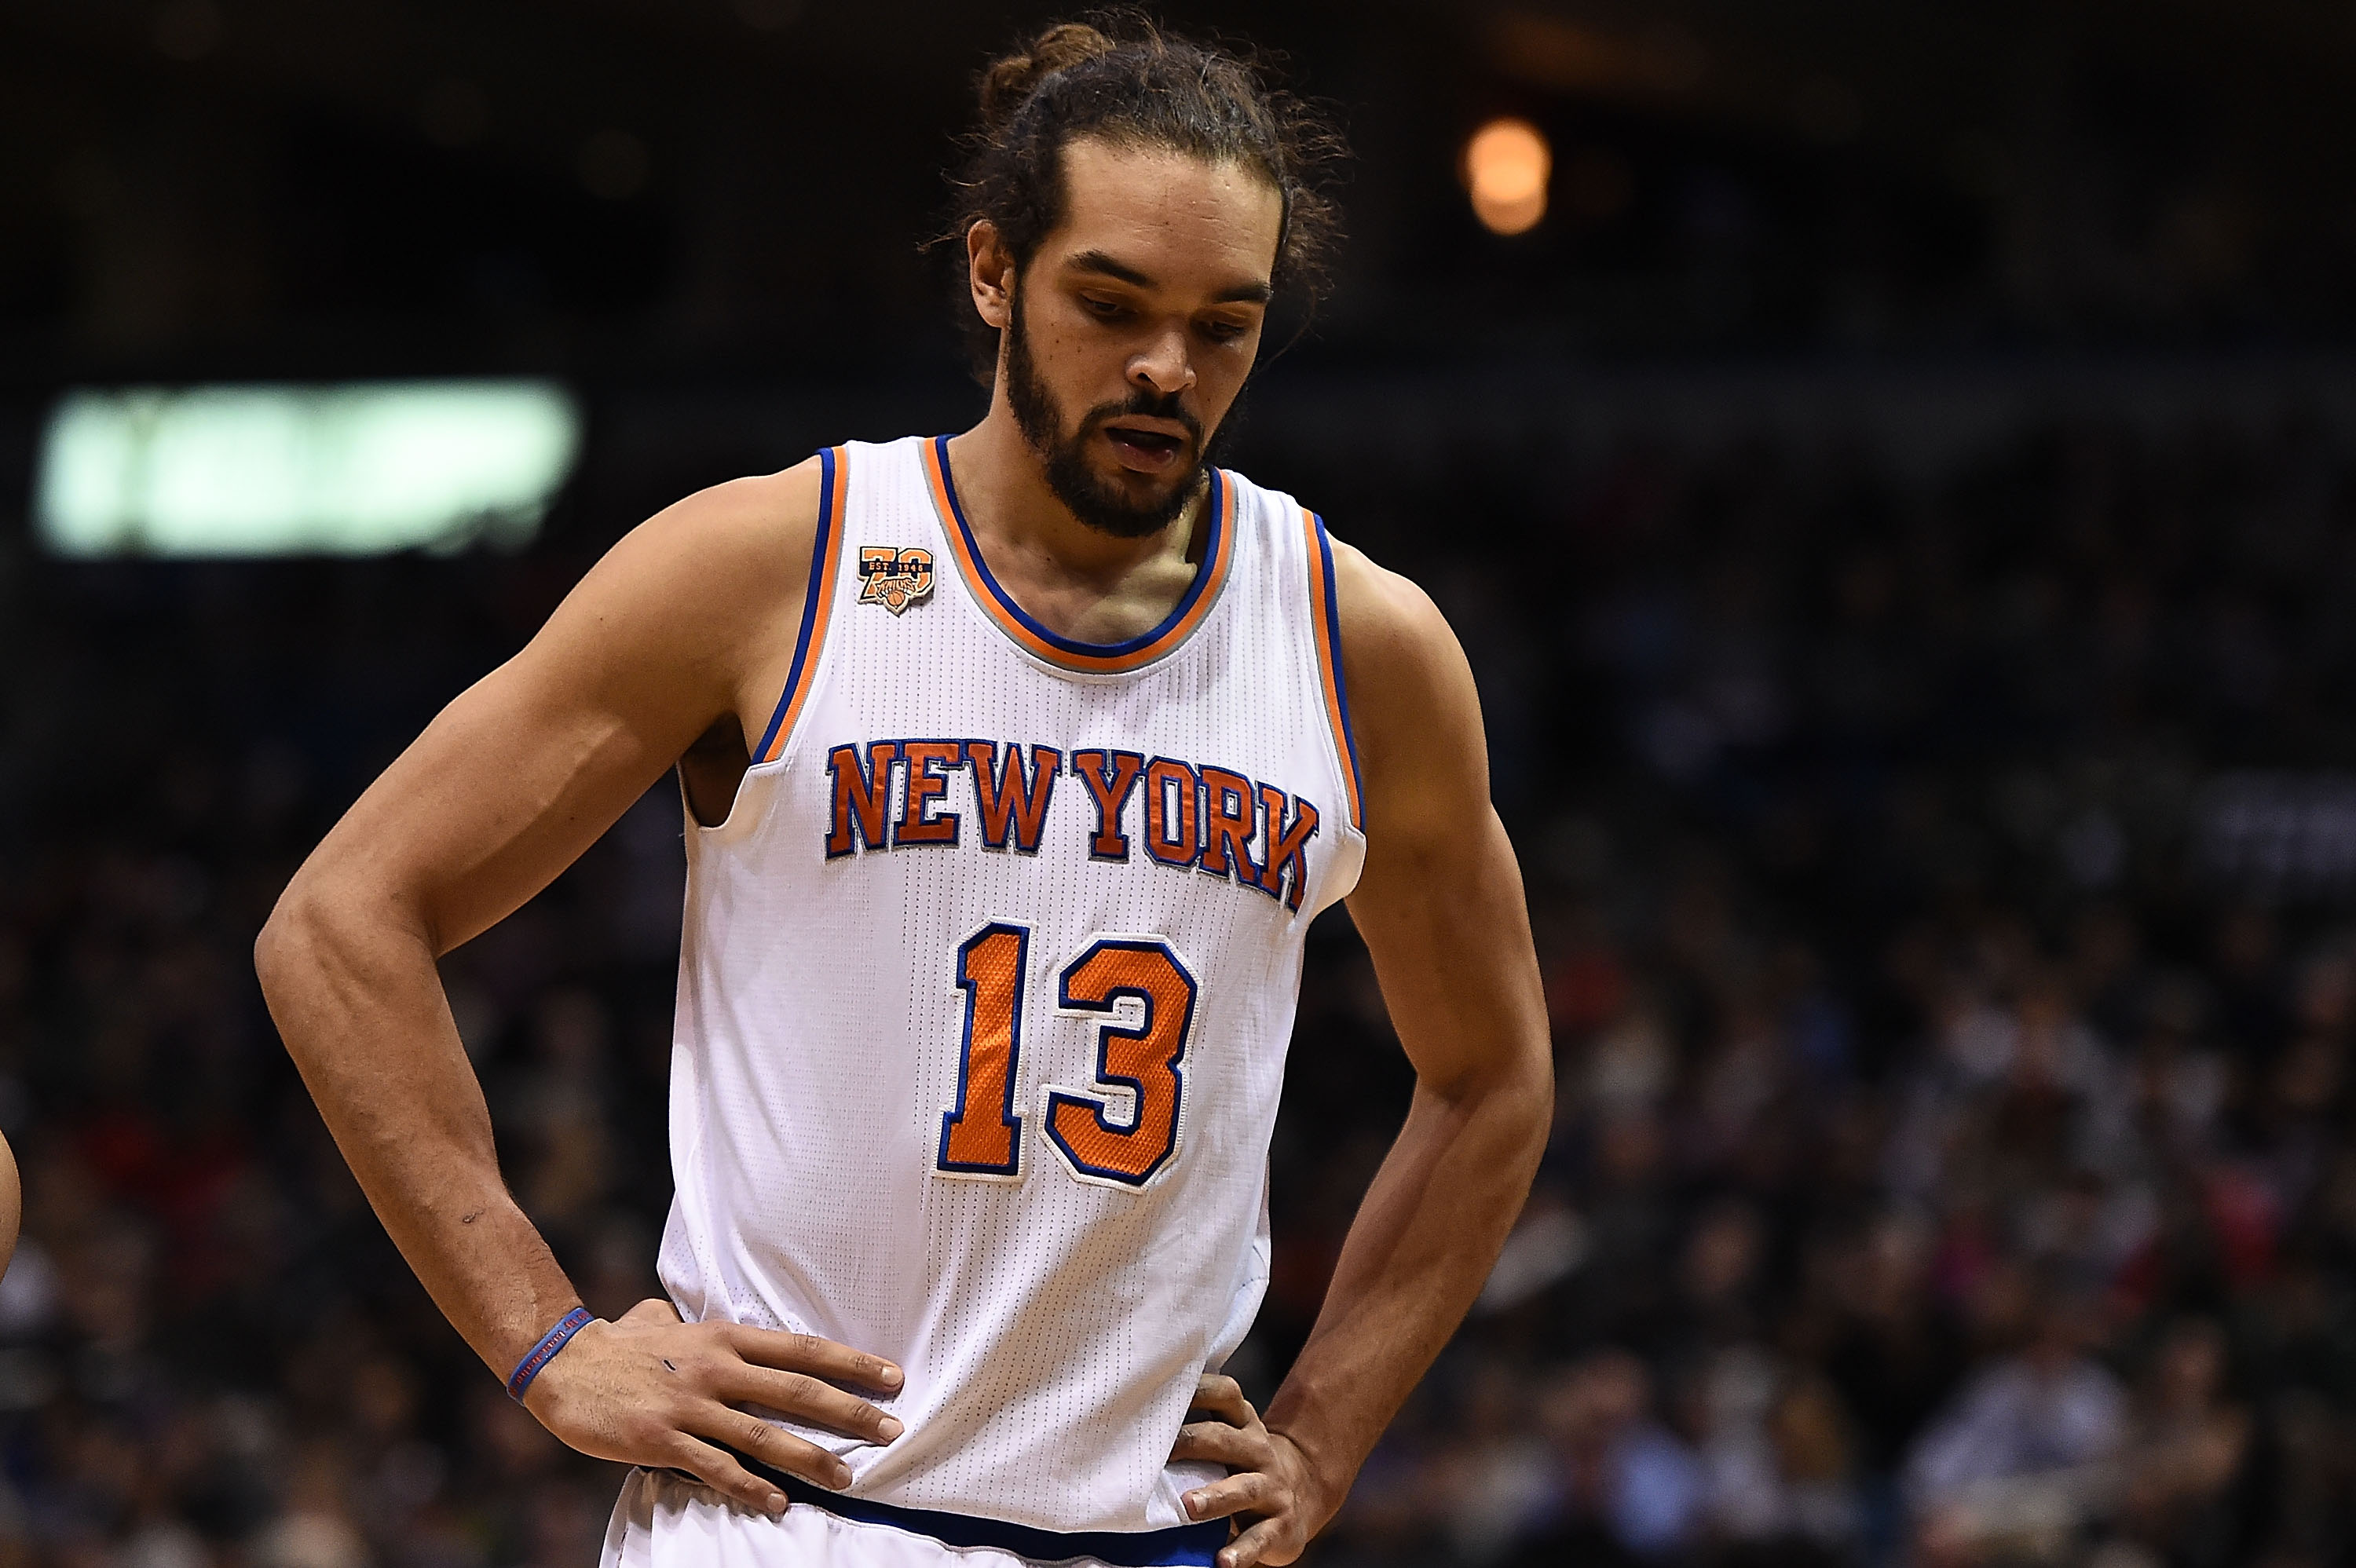 MILWAUKEE, WI - JANUARY 06: Joakim Noah #13 of the New York Knicks reacts to an officials call during a game against the Milwaukee Bucks at BMO Harris Bradley Center on January 6, 2017 in Milwaukee, Wisconsin. NOTE TO USER: User expressly acknowledges and agrees that, by downloading and or using this photograph, User is consenting to the terms and conditions of the Getty Images License Agreement. (Photo by Stacy Revere/Getty Images)